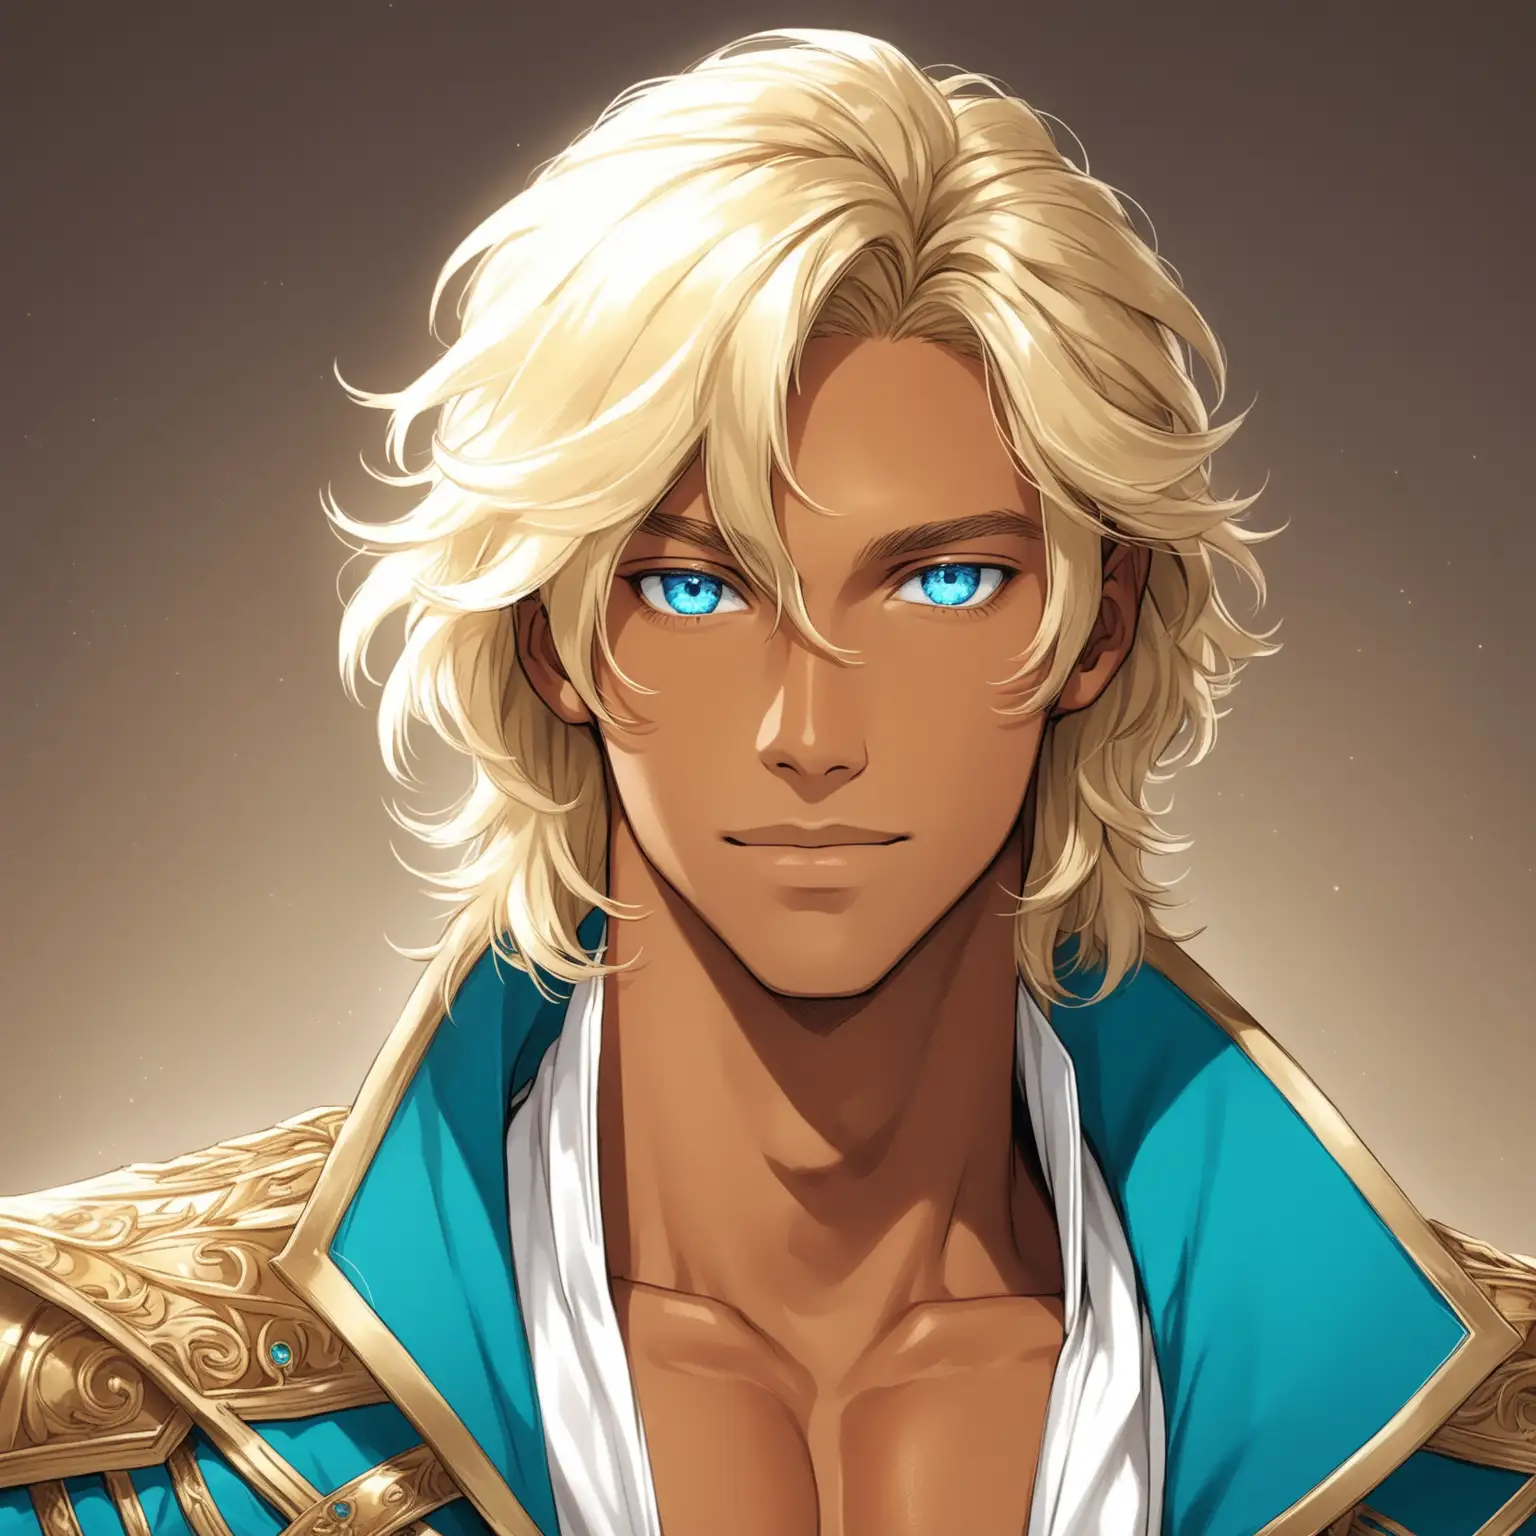 Handsome Blonde Prince with Aqua Blue Eyes and Tan Skin